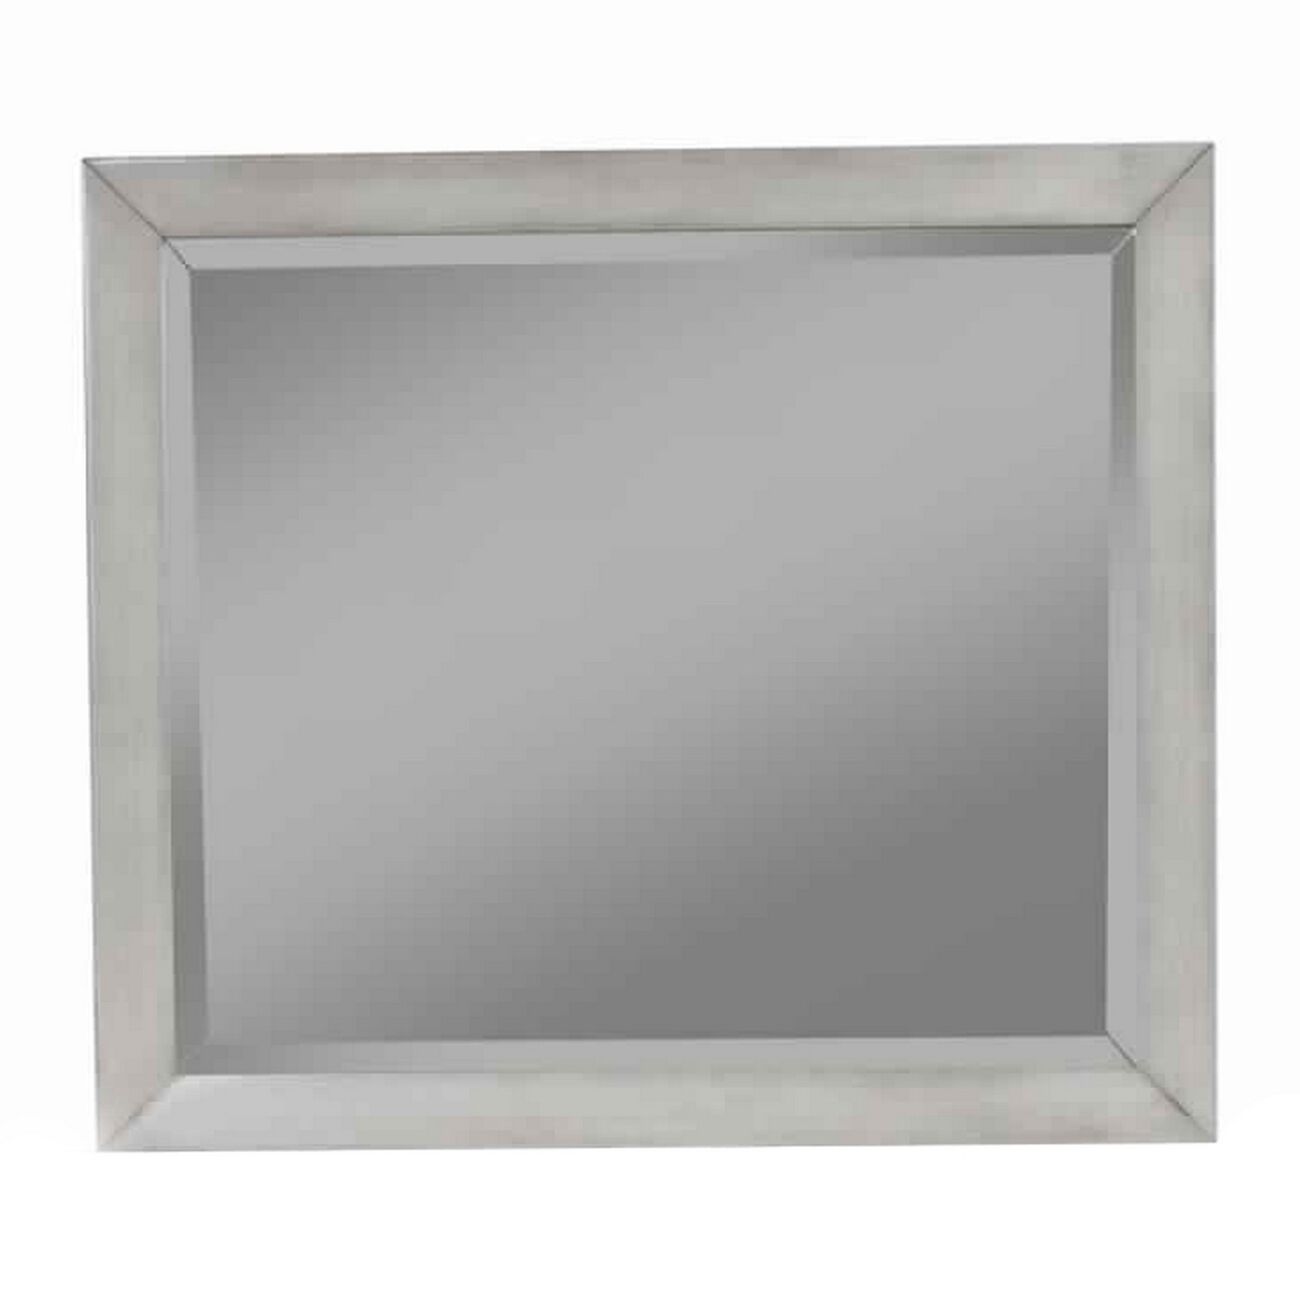 Mid Century Modern Rectangular Molded Mirror with Wooden Frame, Gray